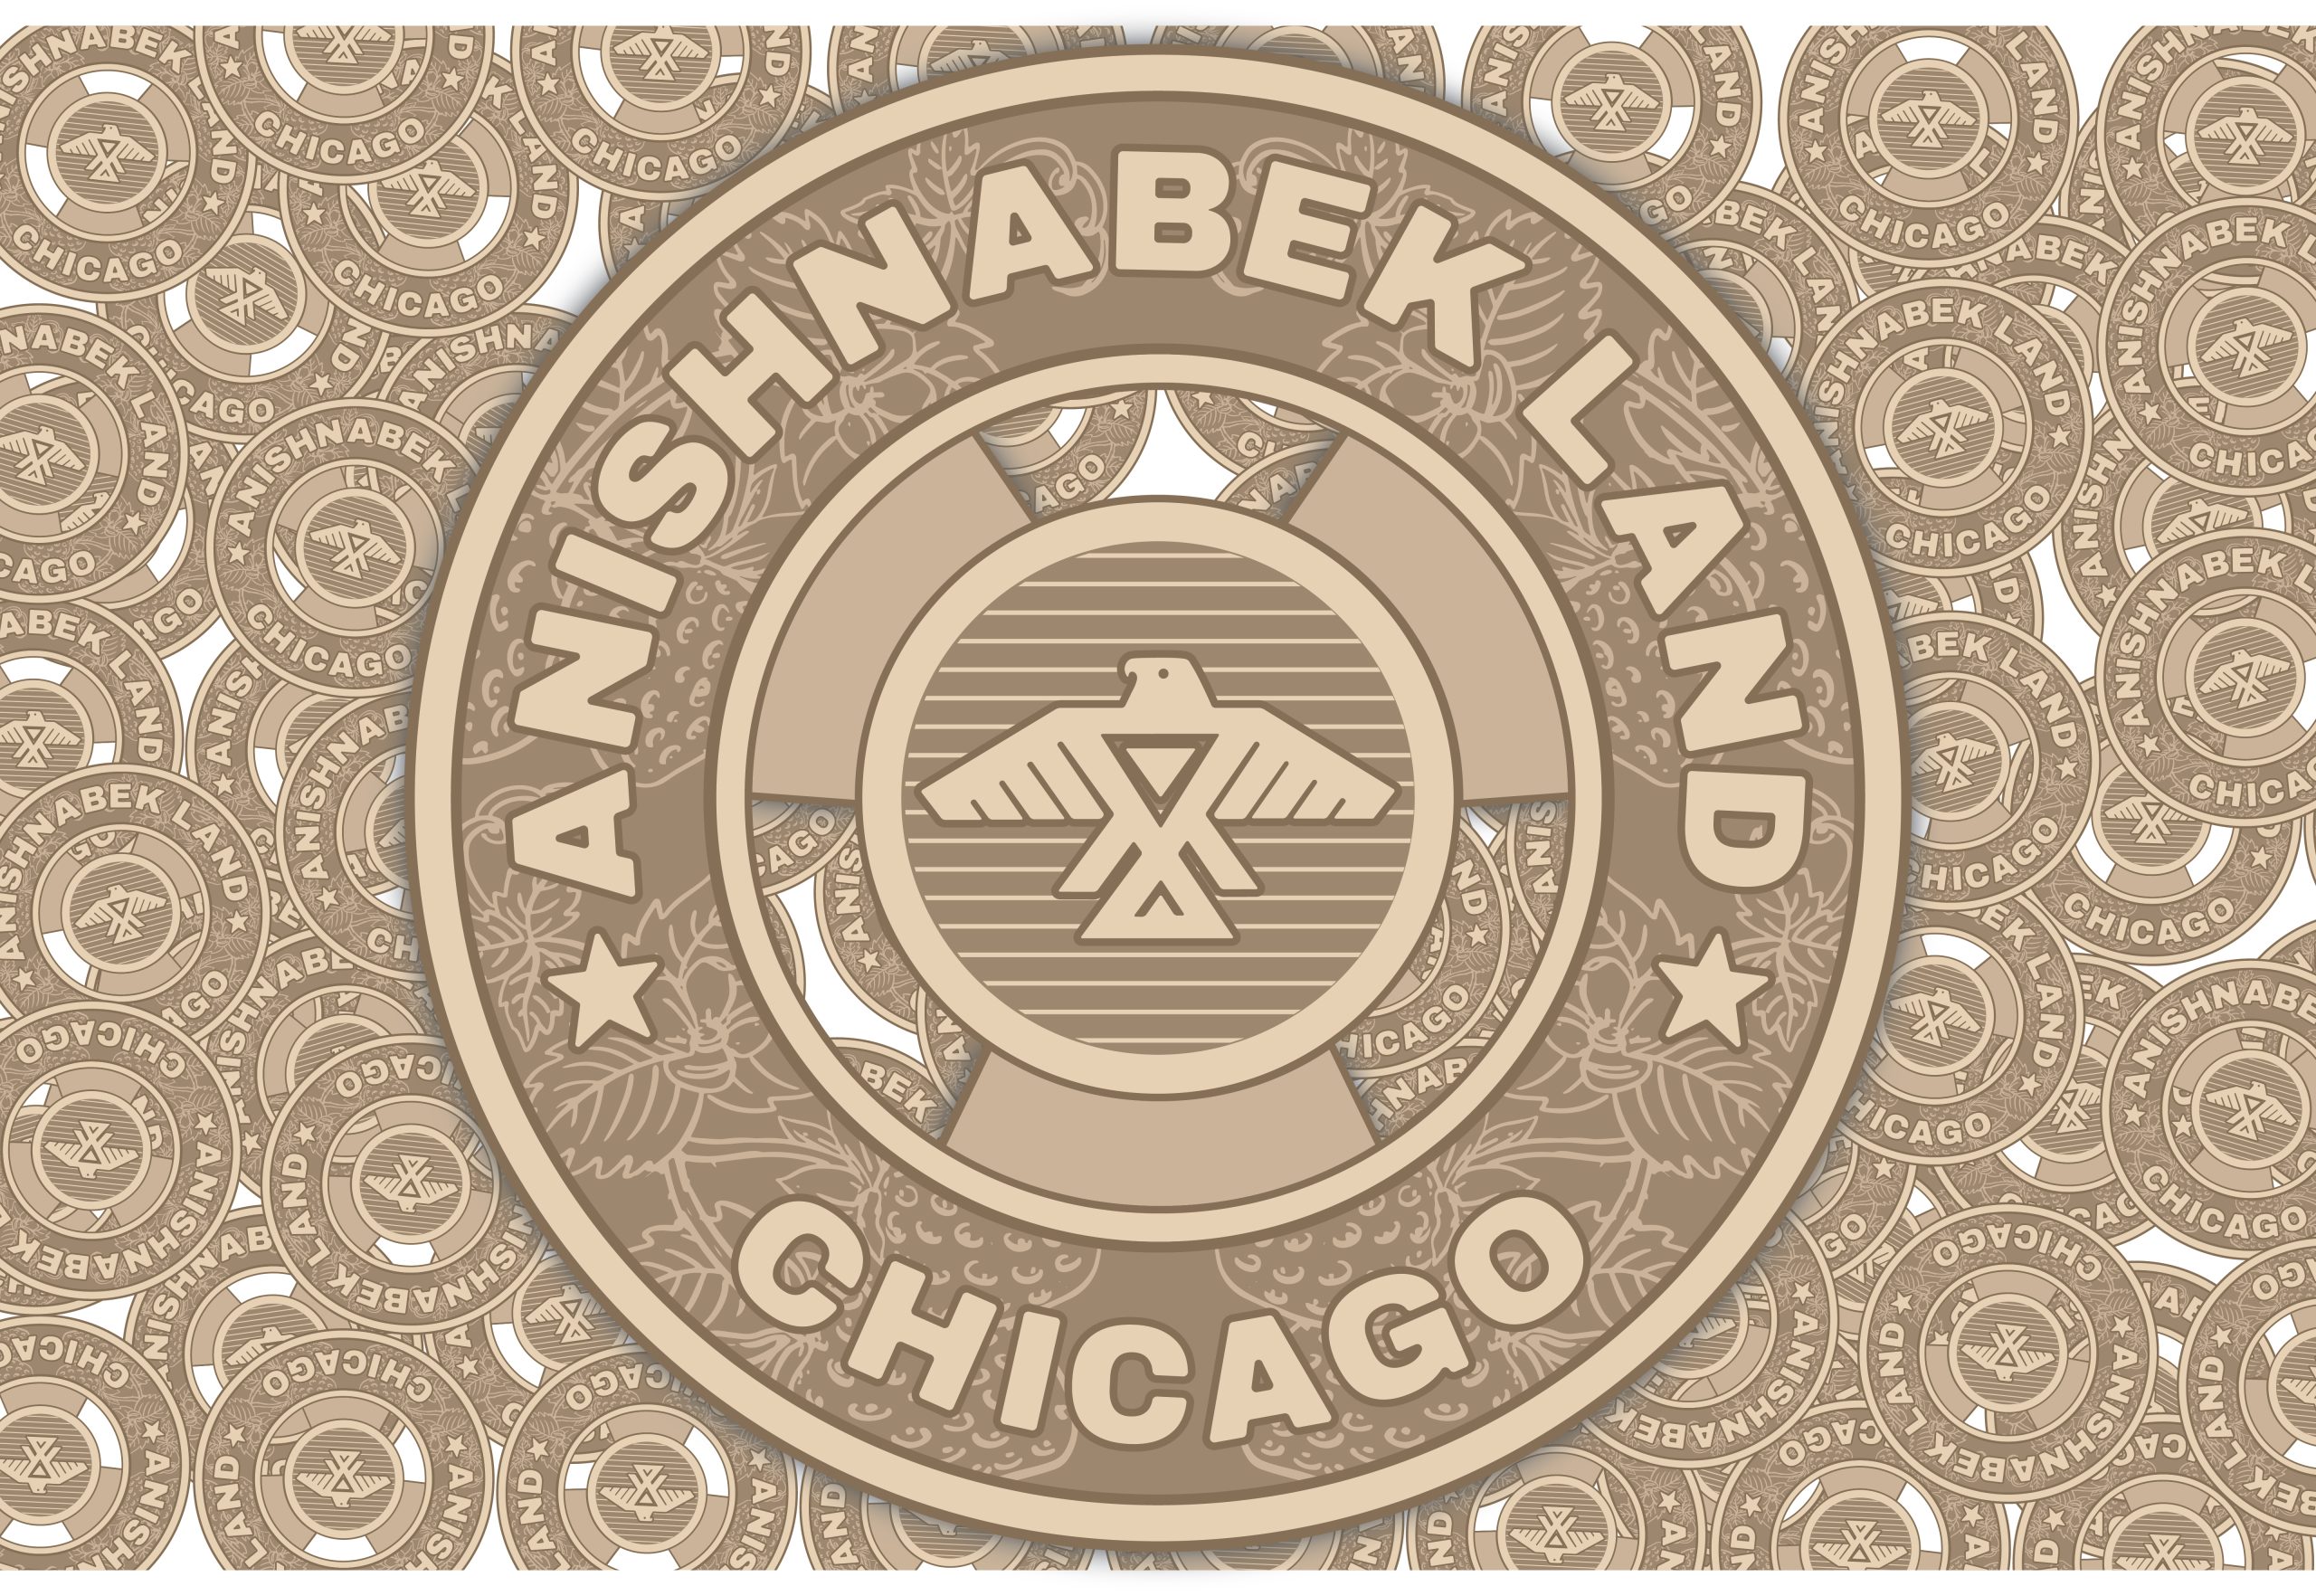 Image: A beige and tan graphic in the shape of a city seal. The seal reads: "ANISHNABEK LAND CHICAGO" and has a stylized bird in the center. Graphic created by David Bernie.